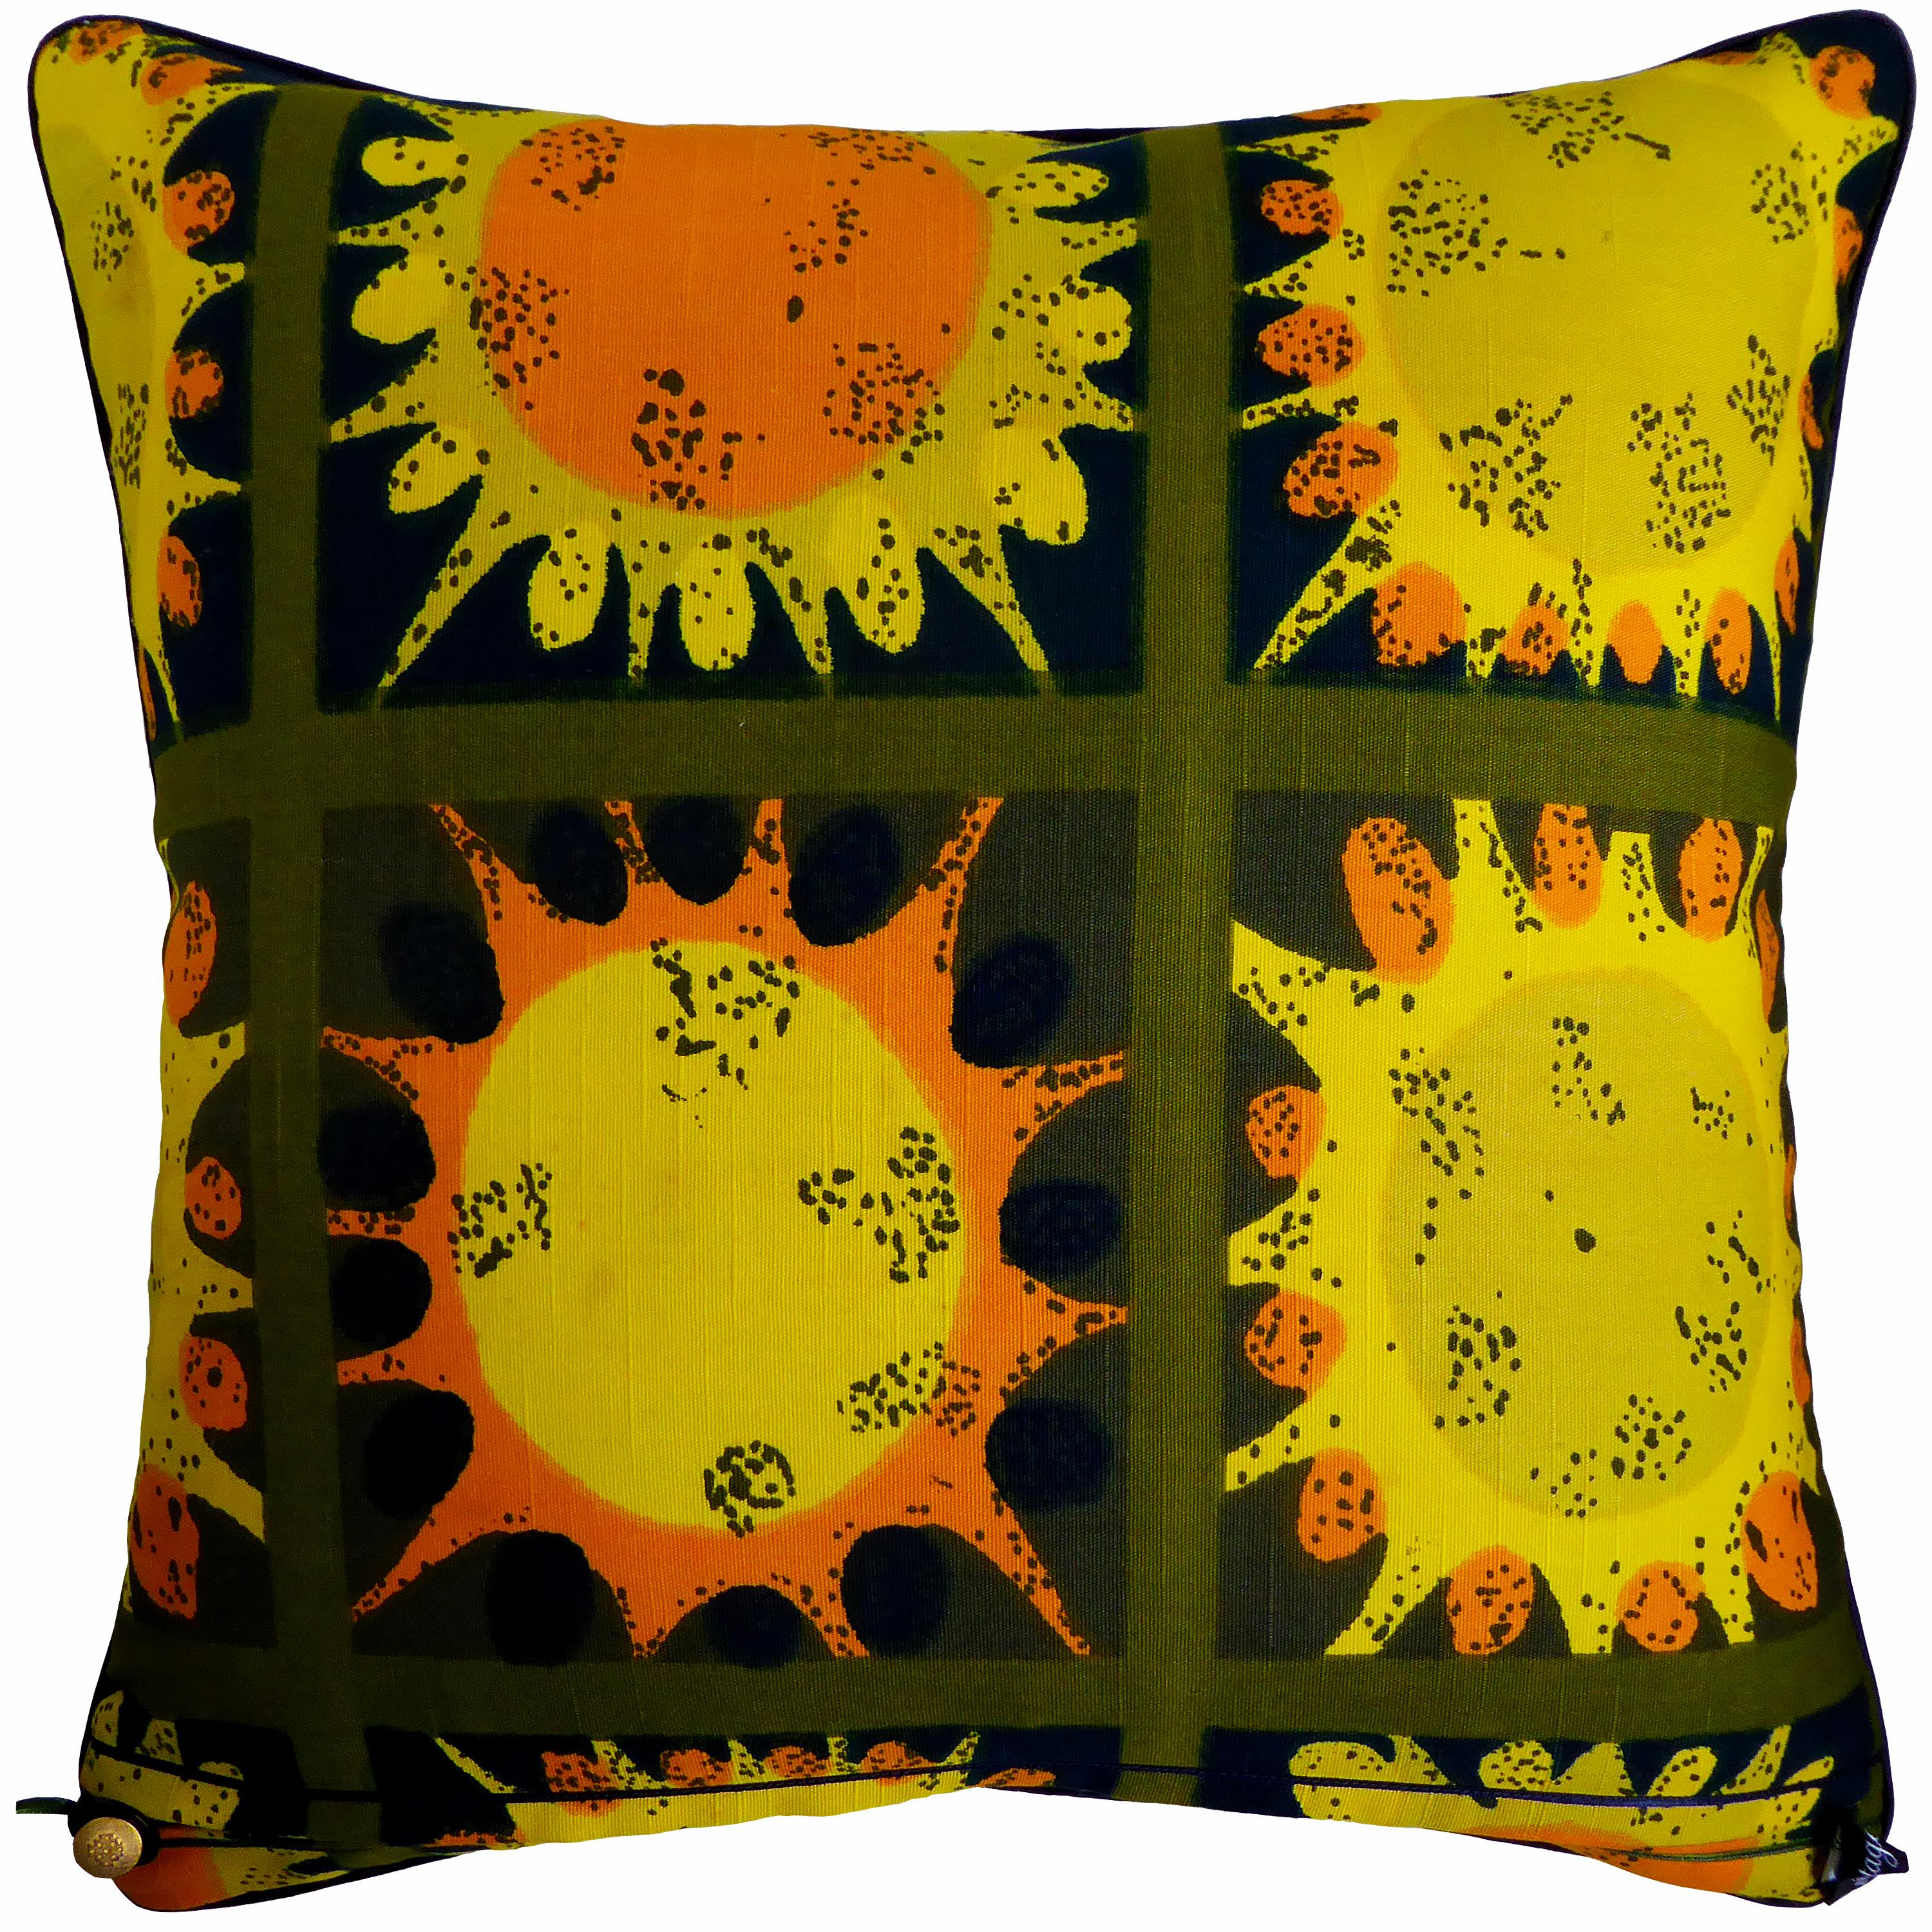 Mid-Century Modern Vintage Cushions, Luxury Bespoke-Made Pillow ‘Paintball', Made in London